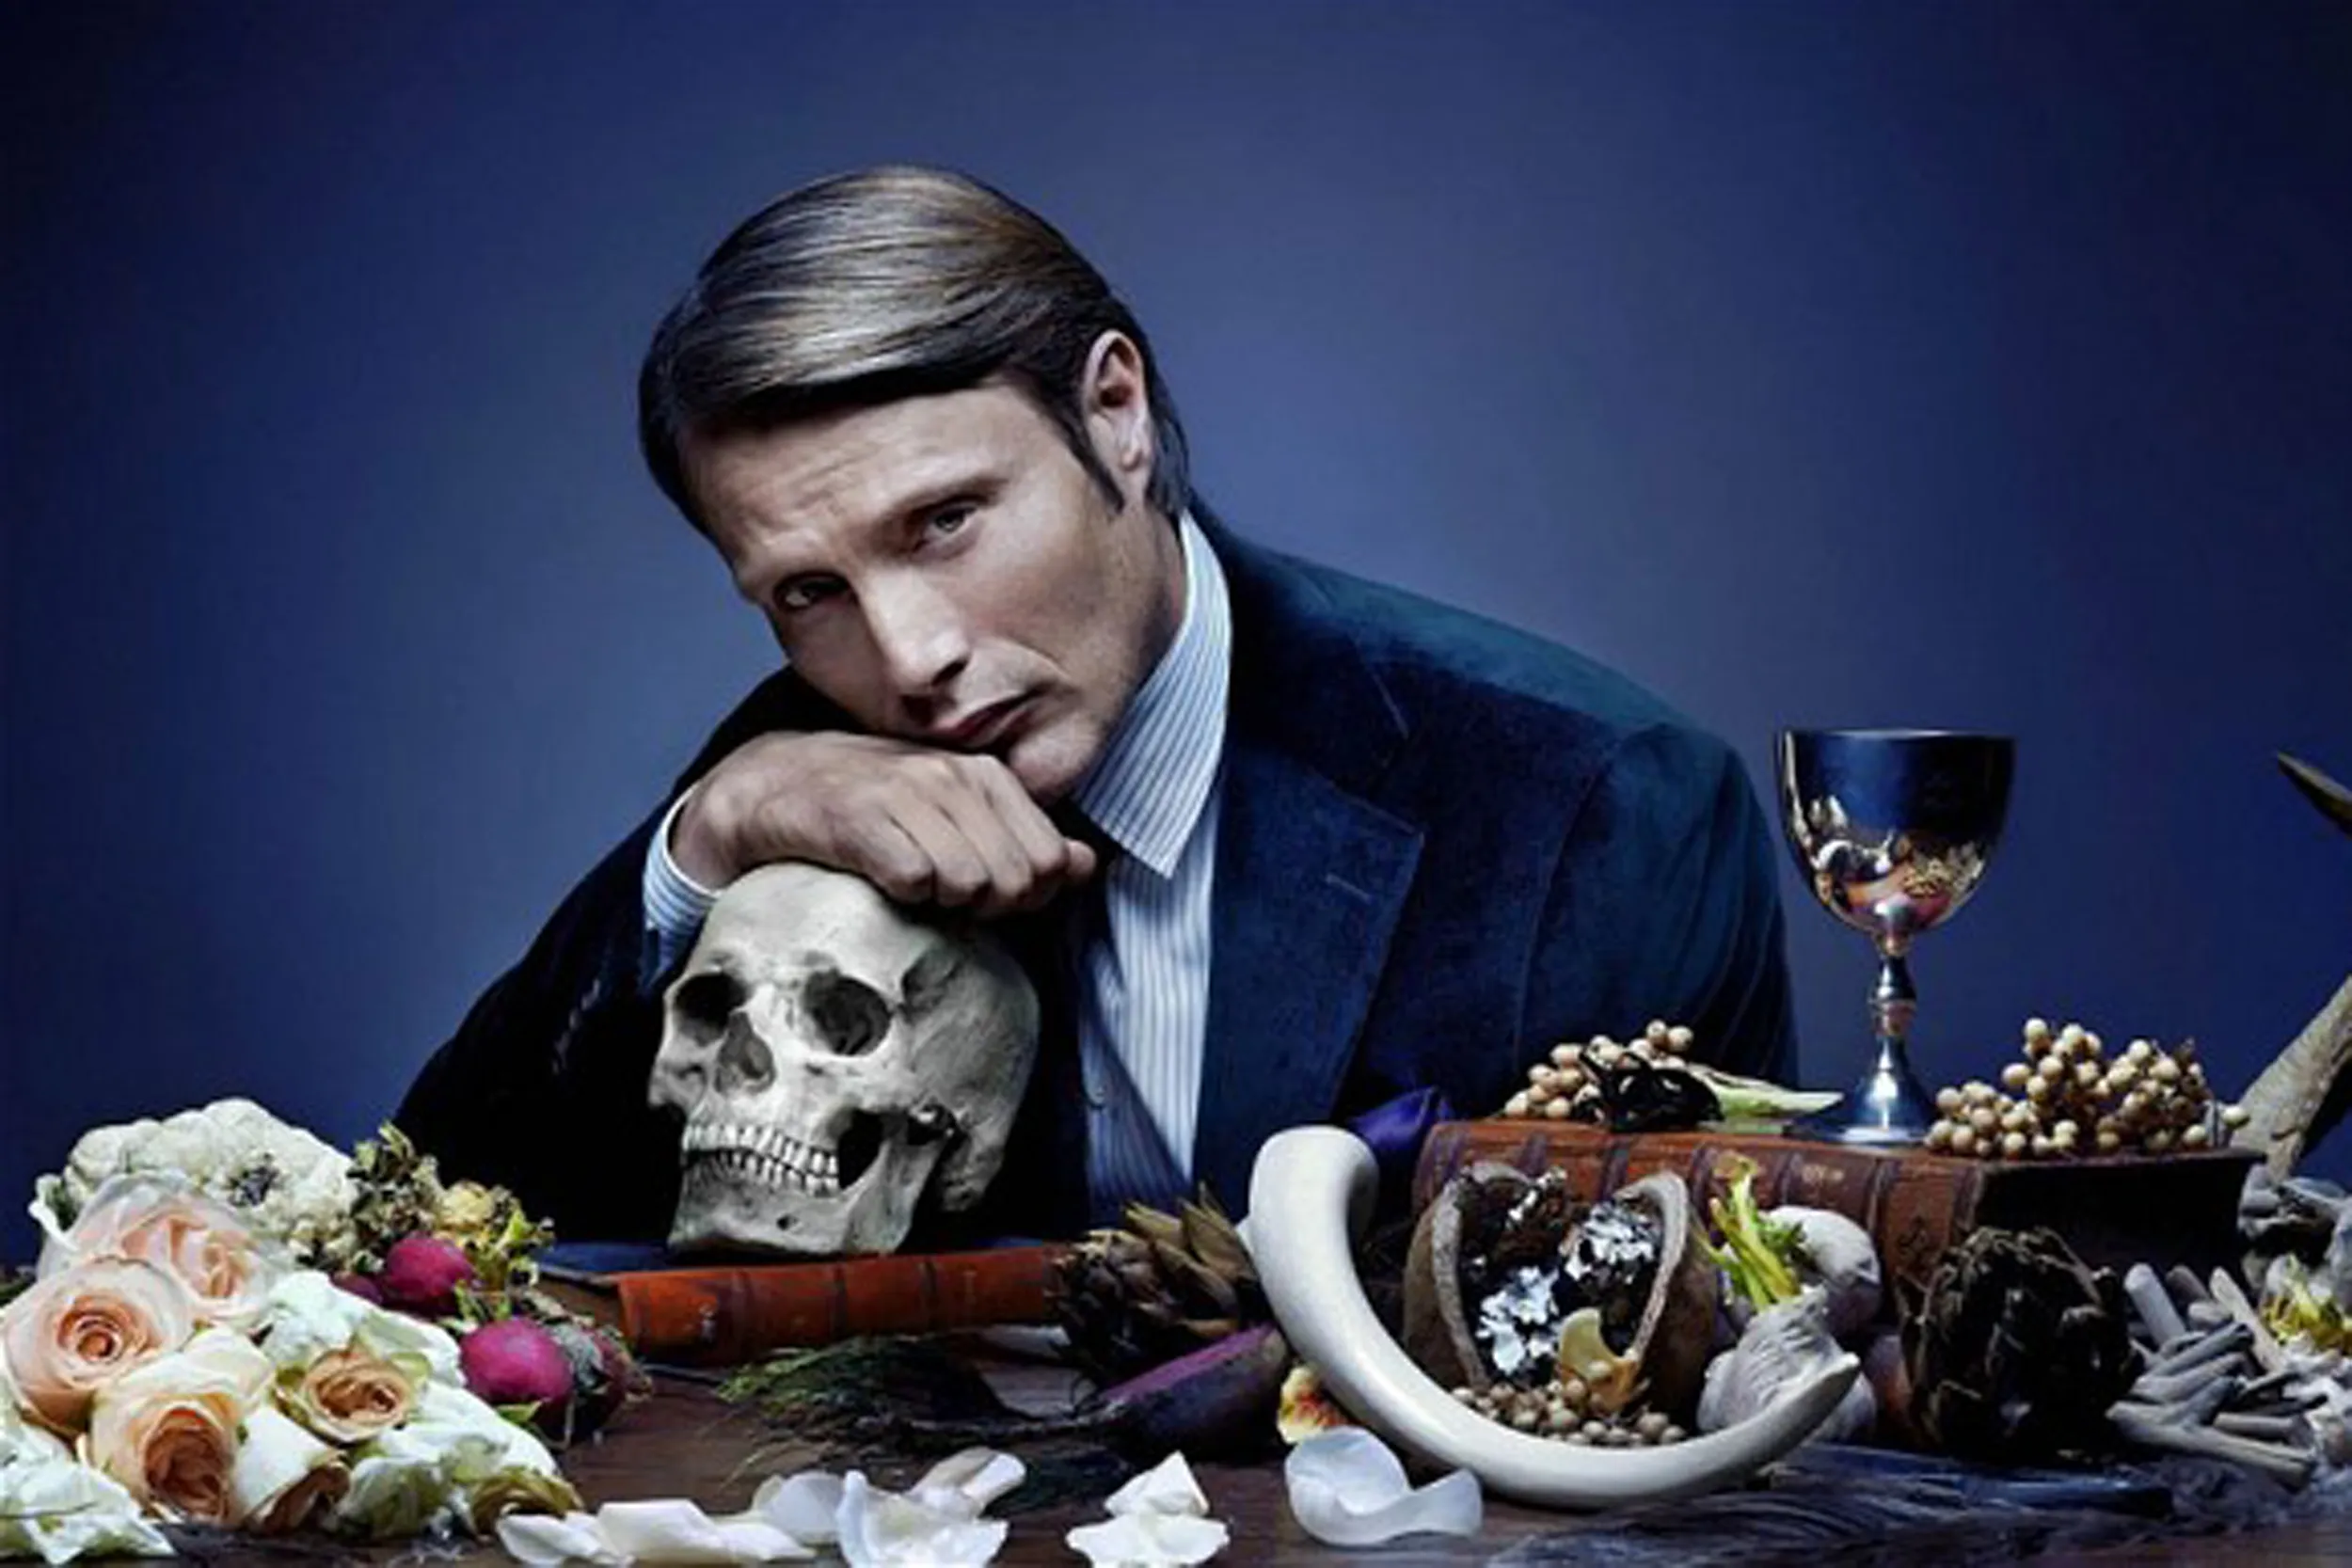 How Well Do You Know NBC's Hannibal? Trivia Quiz